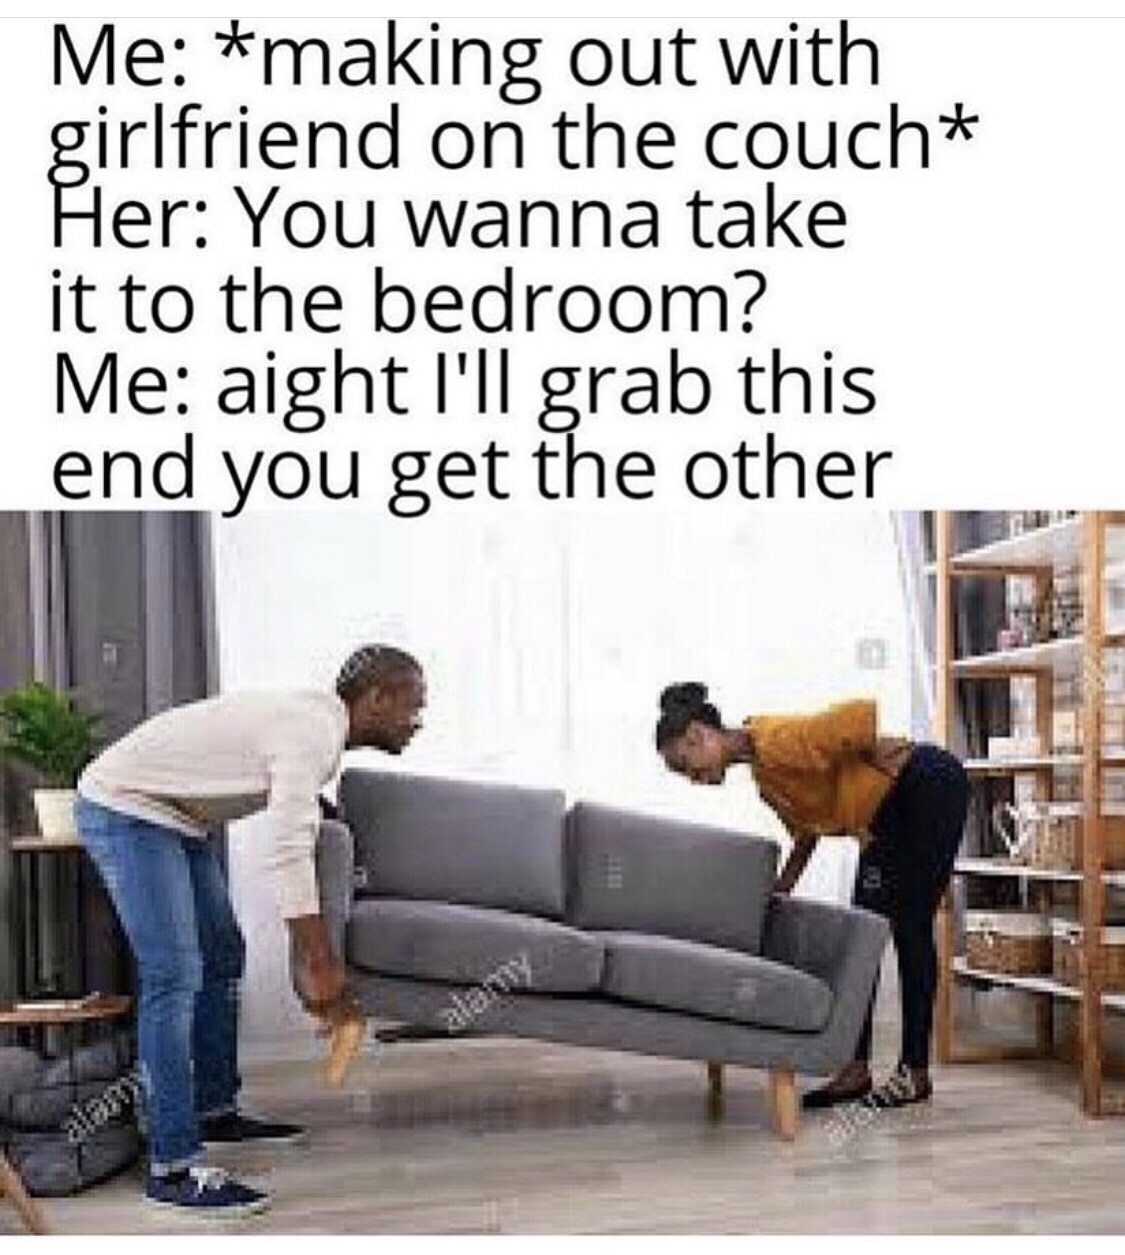 making out on couch meme - Me making out with girlfriend on the couch Her You wanna take it to the bedroom? Me aight I'll grab this end you get the other